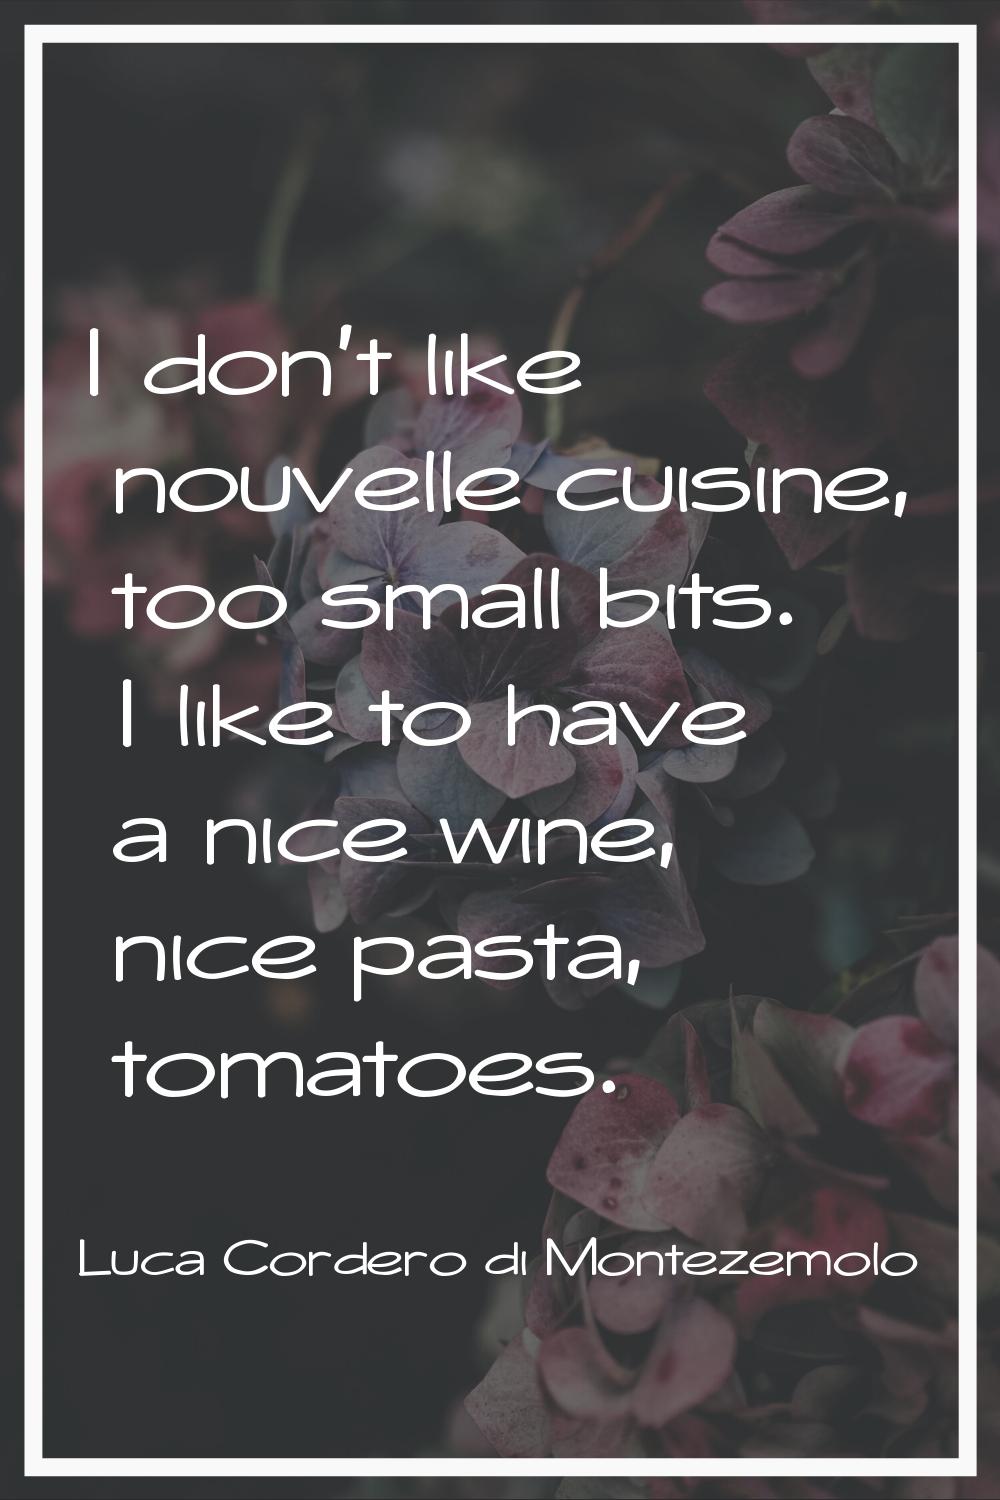 I don't like nouvelle cuisine, too small bits. I like to have a nice wine, nice pasta, tomatoes.